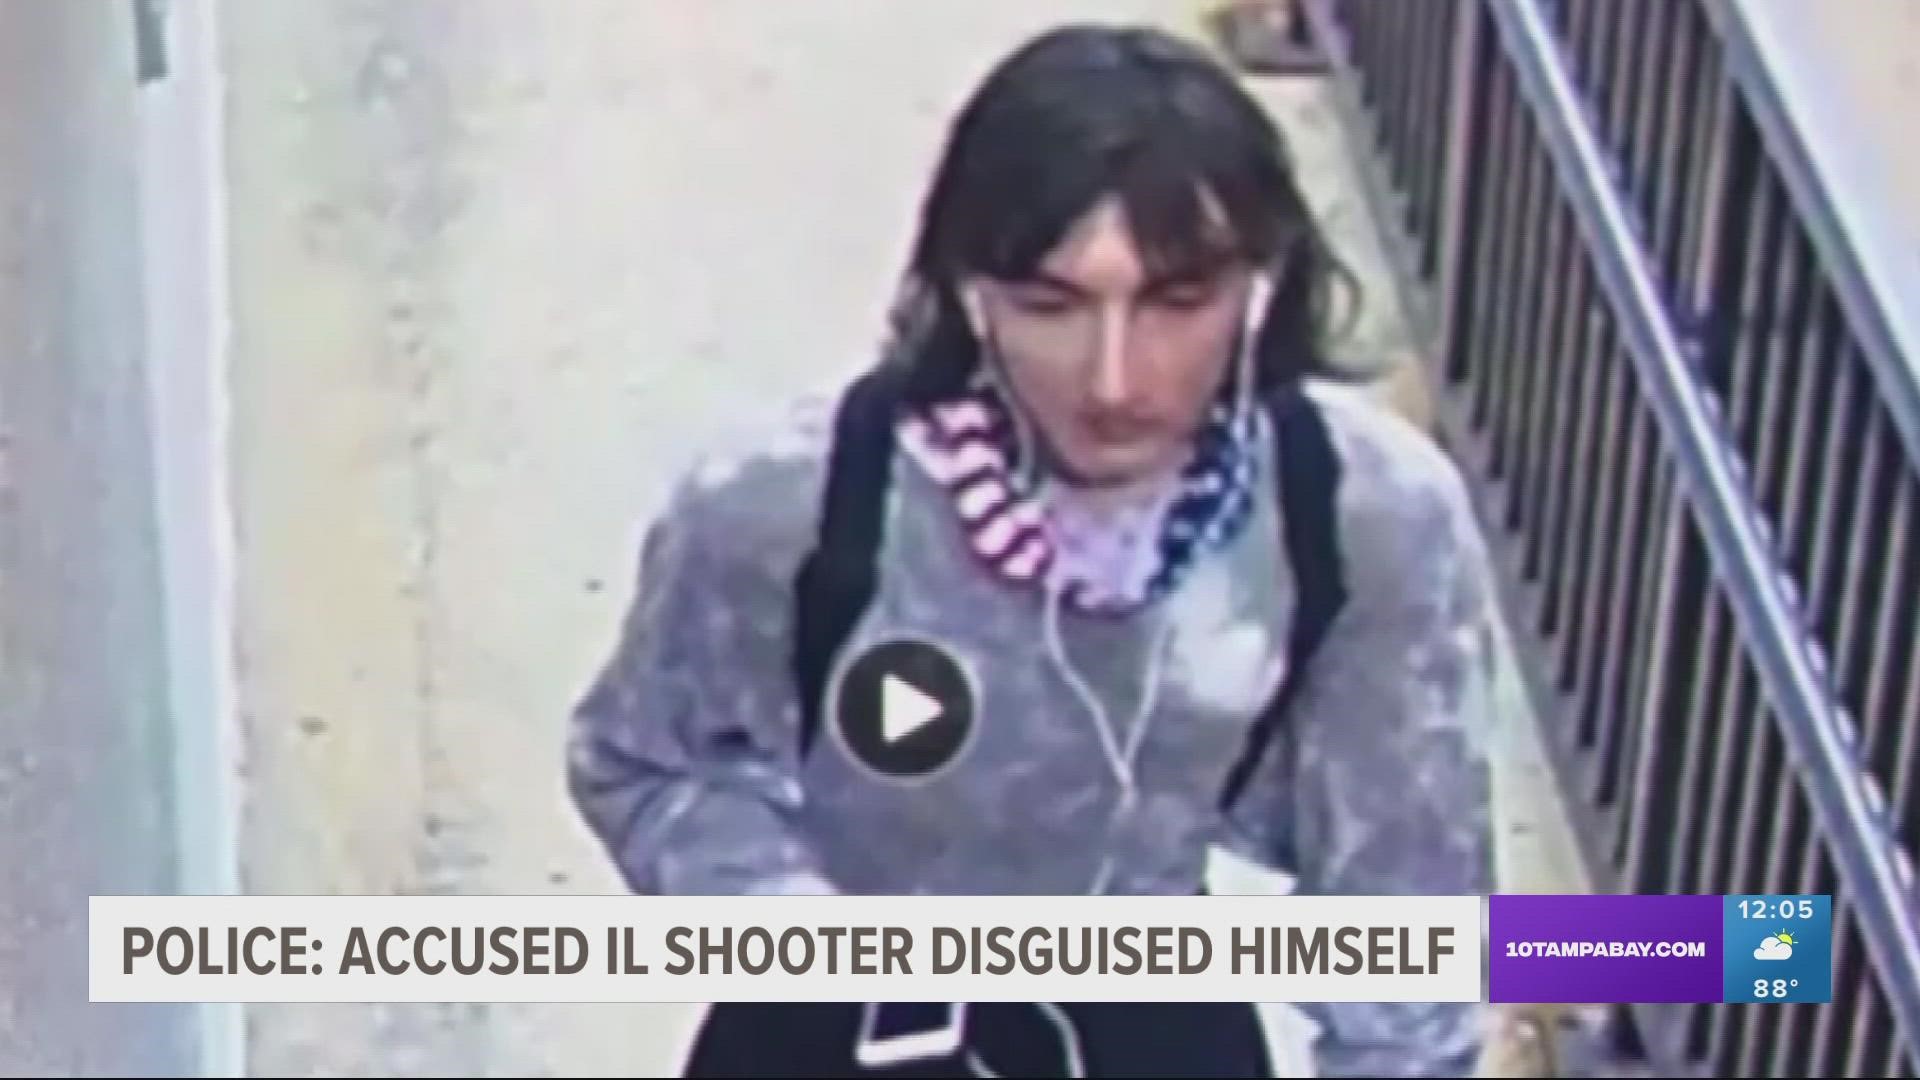 Police said the gunman evaded initial capture by dressing as a woman and blending into the fleeing crowd.